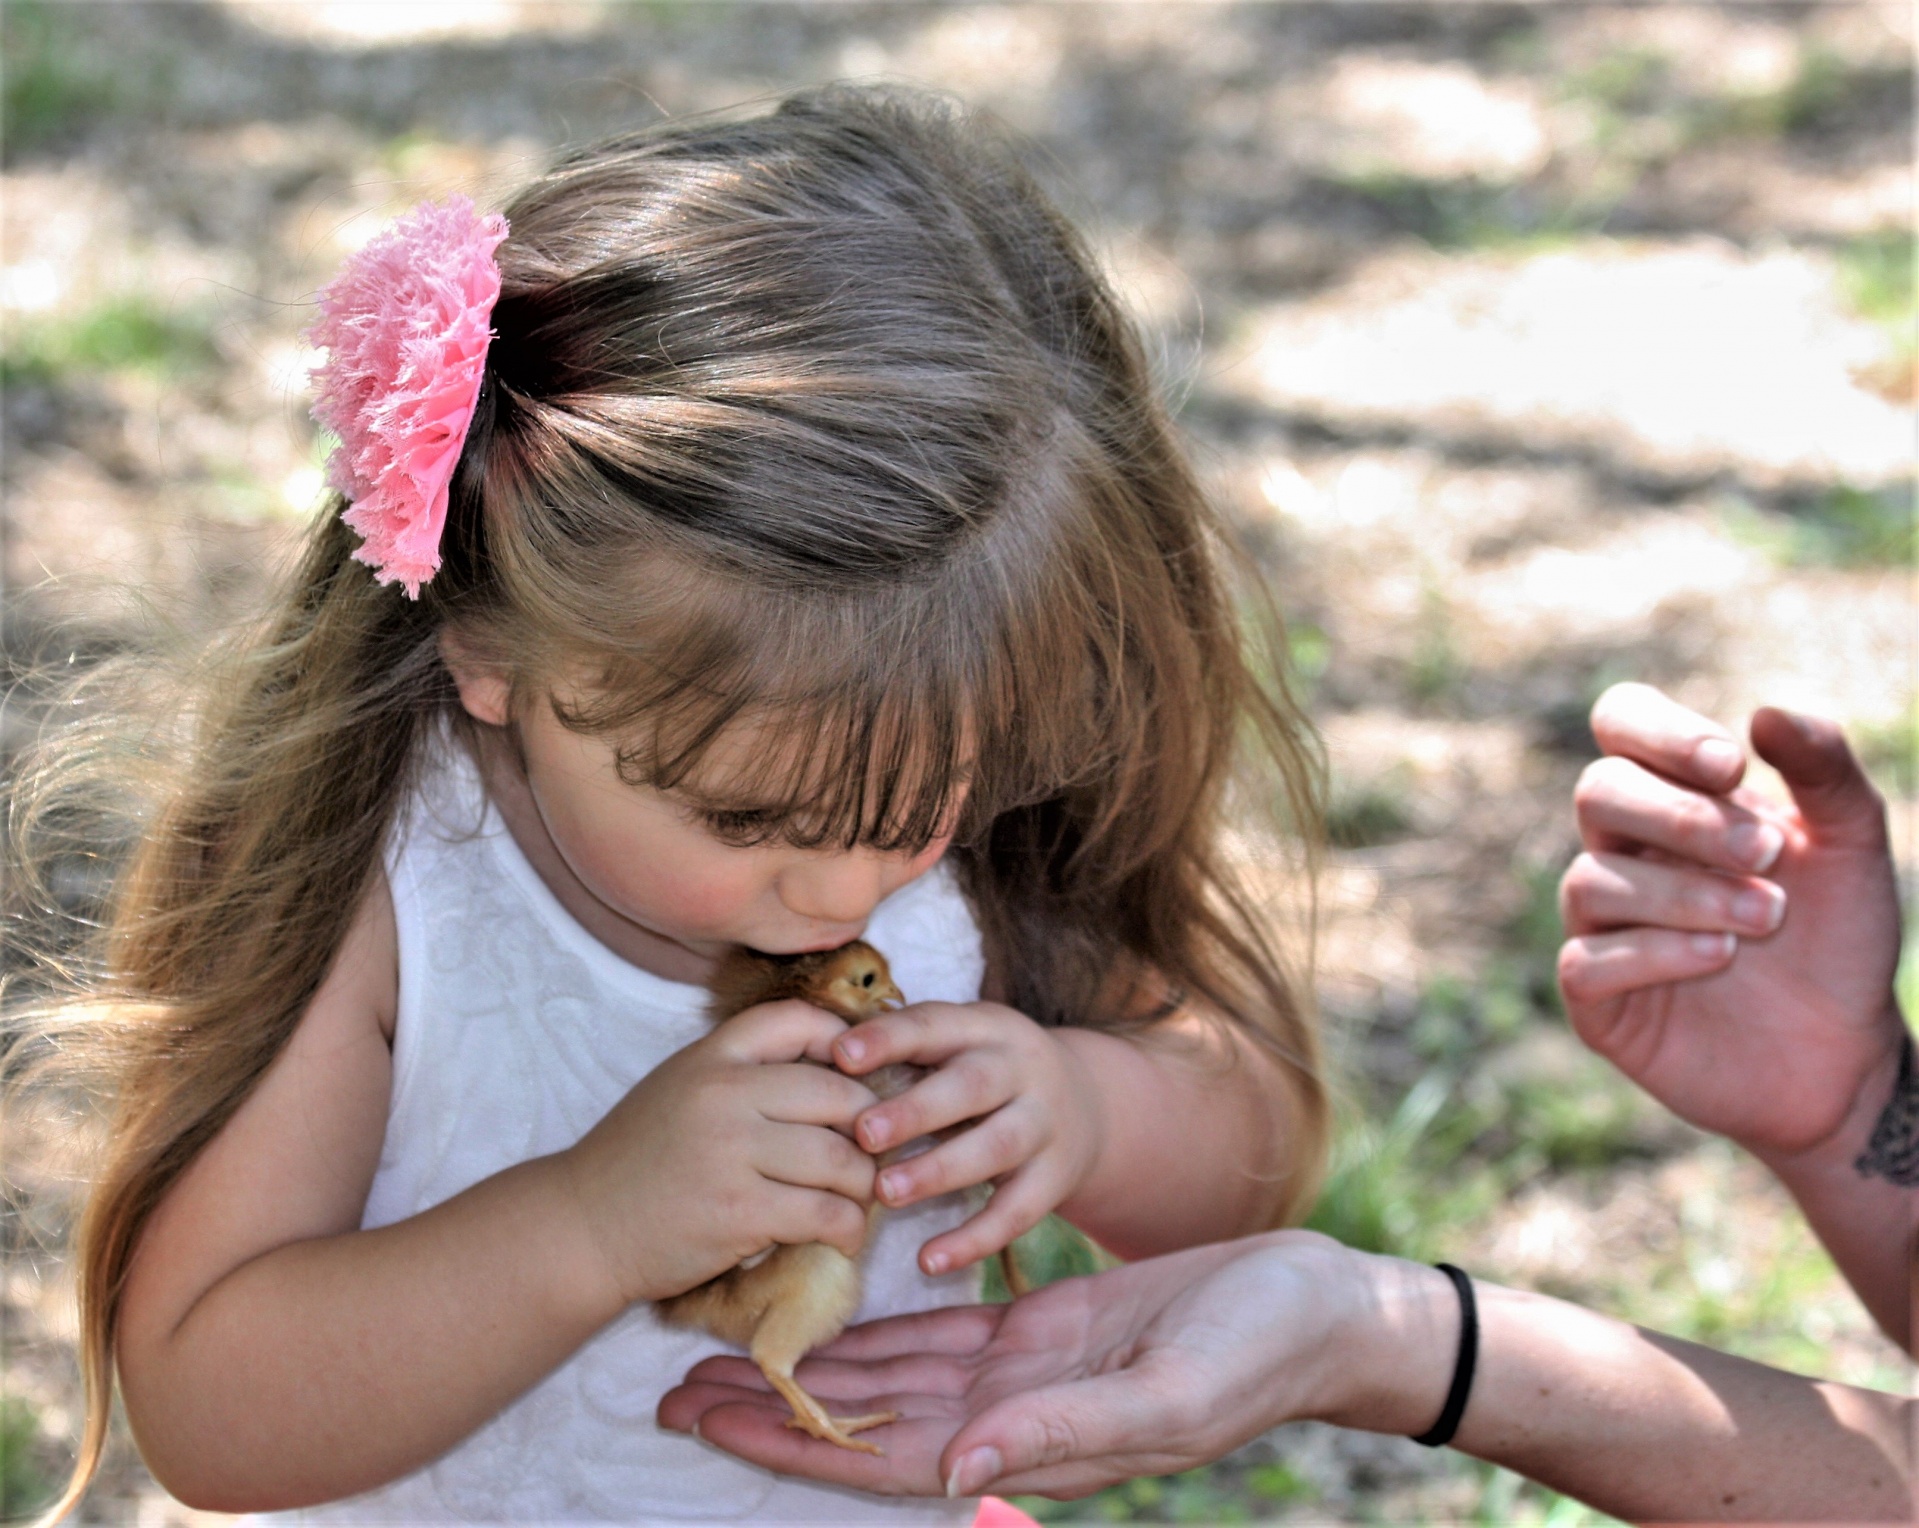 A cute little girl, with long hair is holding and kissing a little baby chick at Easter.